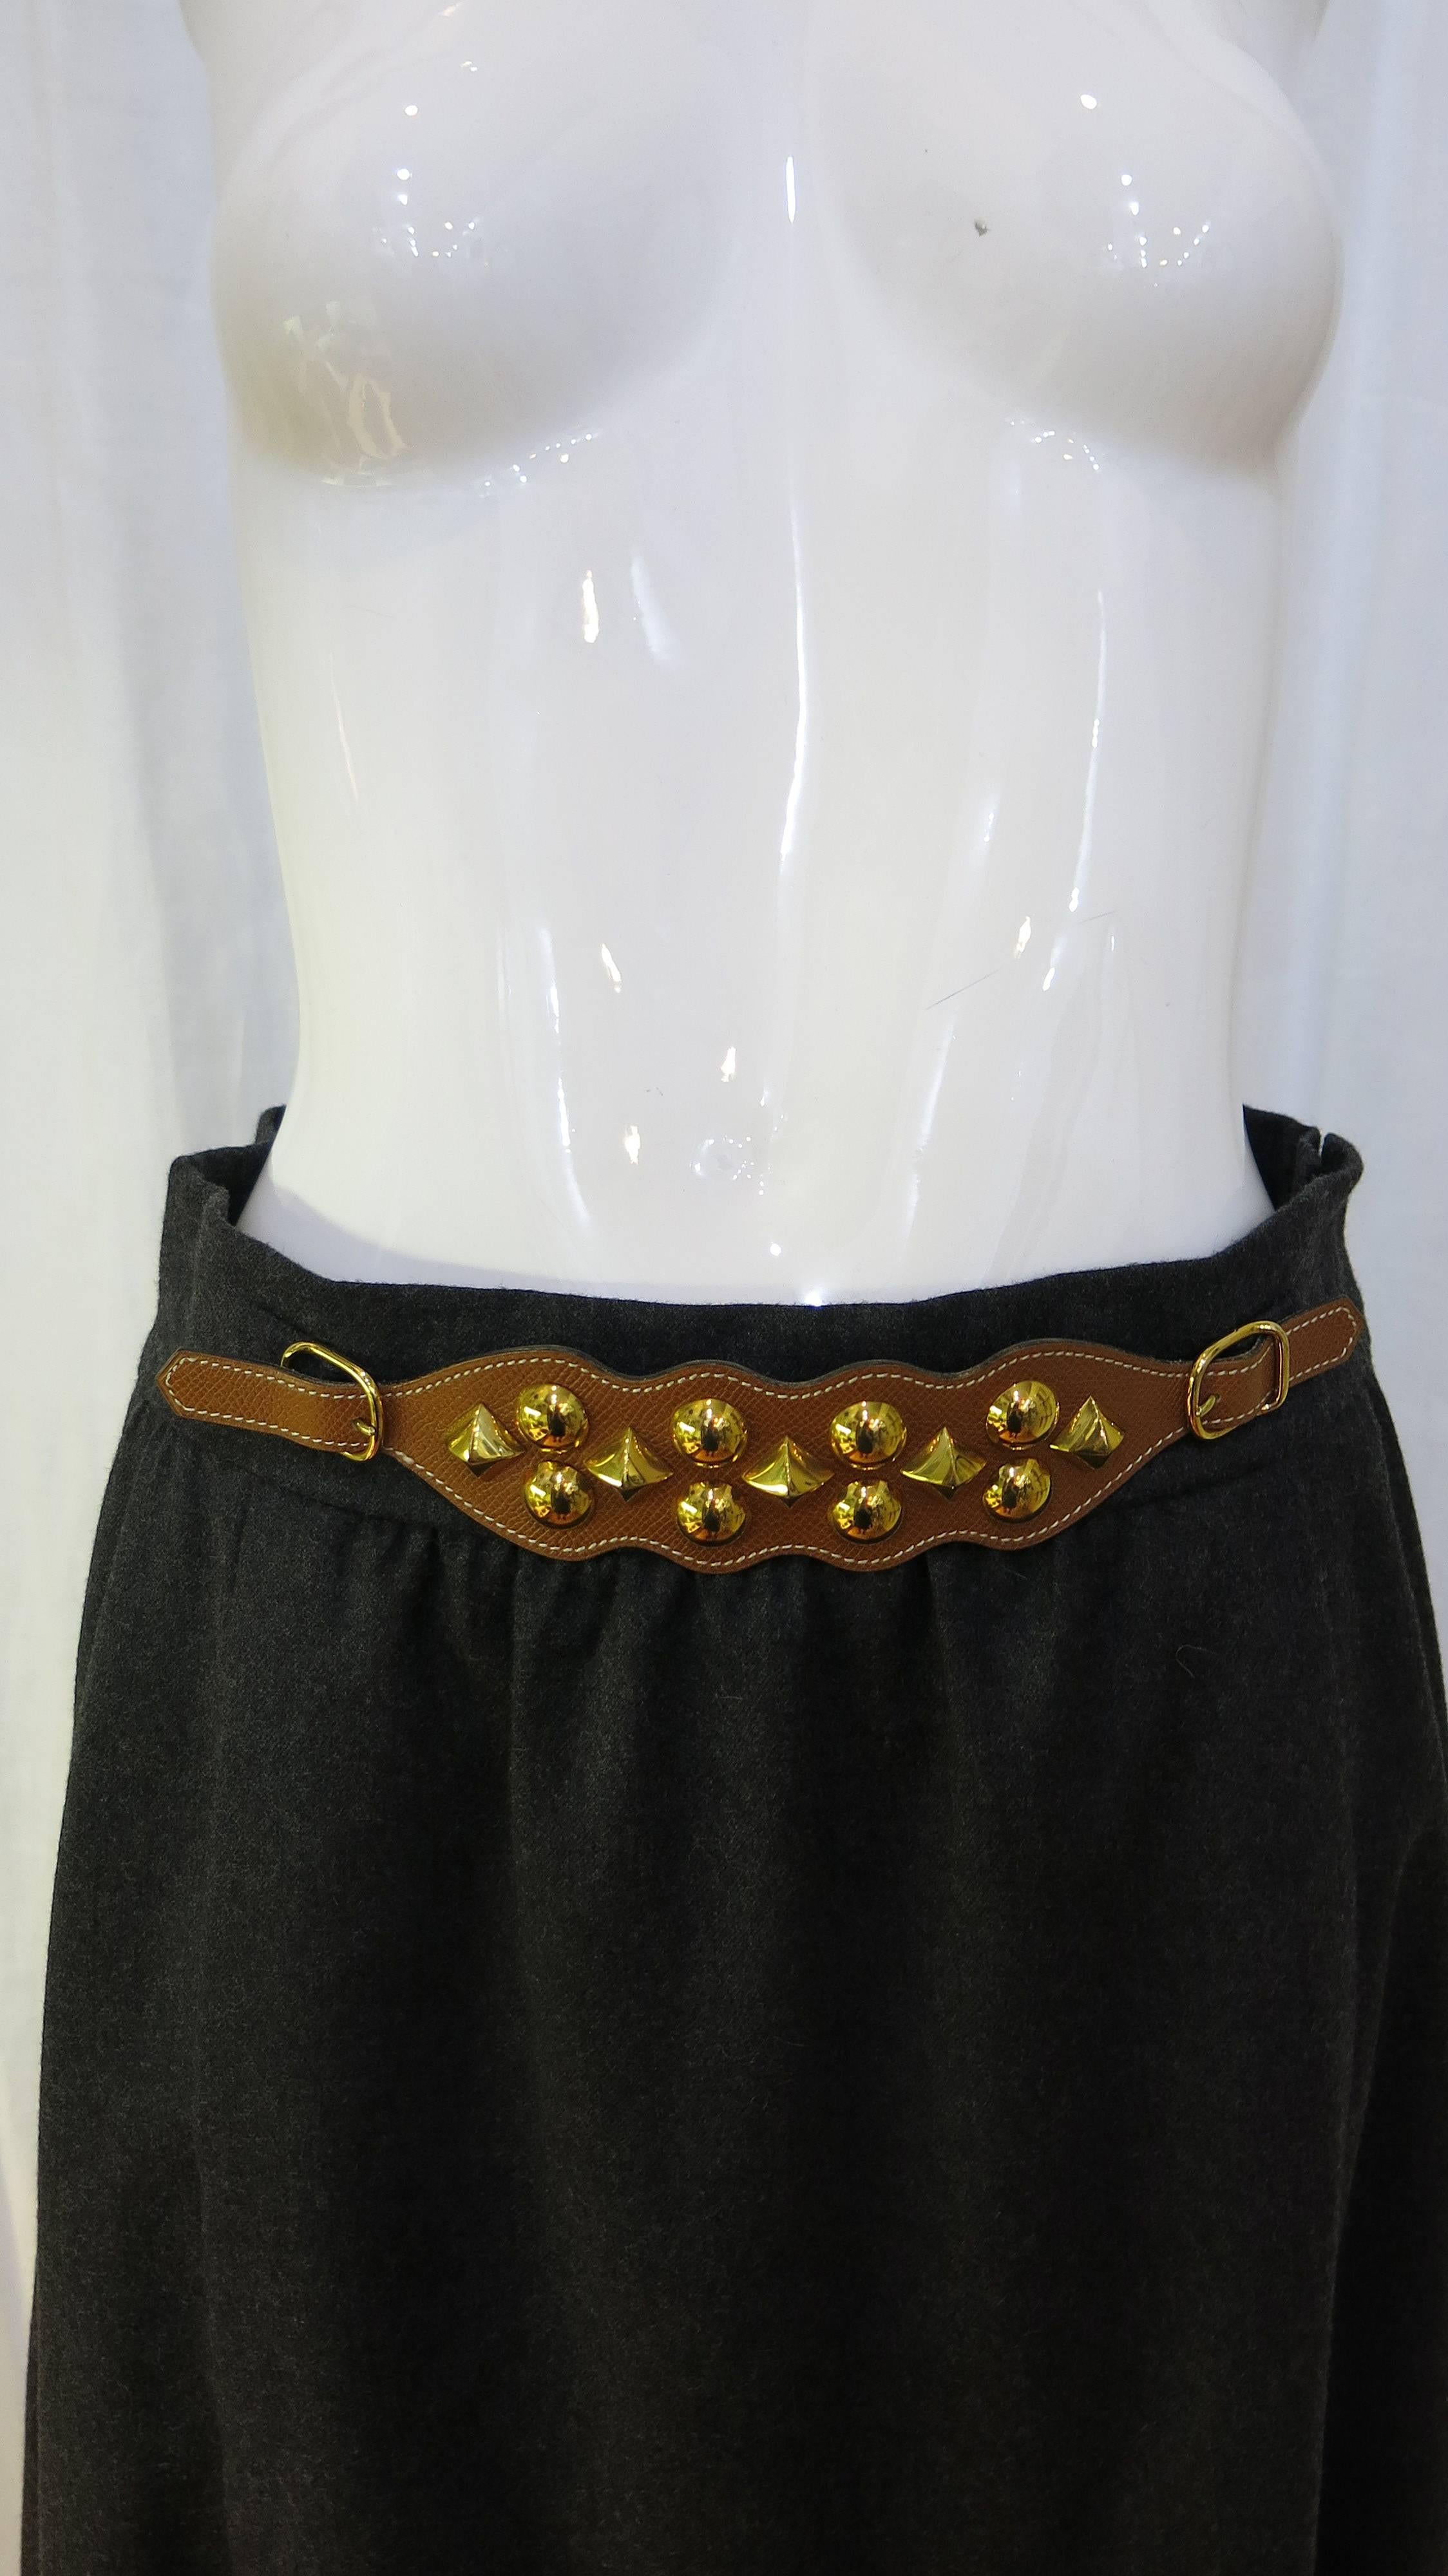 Knee length 90% wool 10% cashmere blend silk-lined A-line skirt with studded leather belt detail. Zips up the side with a double hook and eye closure. Marked as a French size 42 which translates to size 12 in US sizing but fits more like a US size